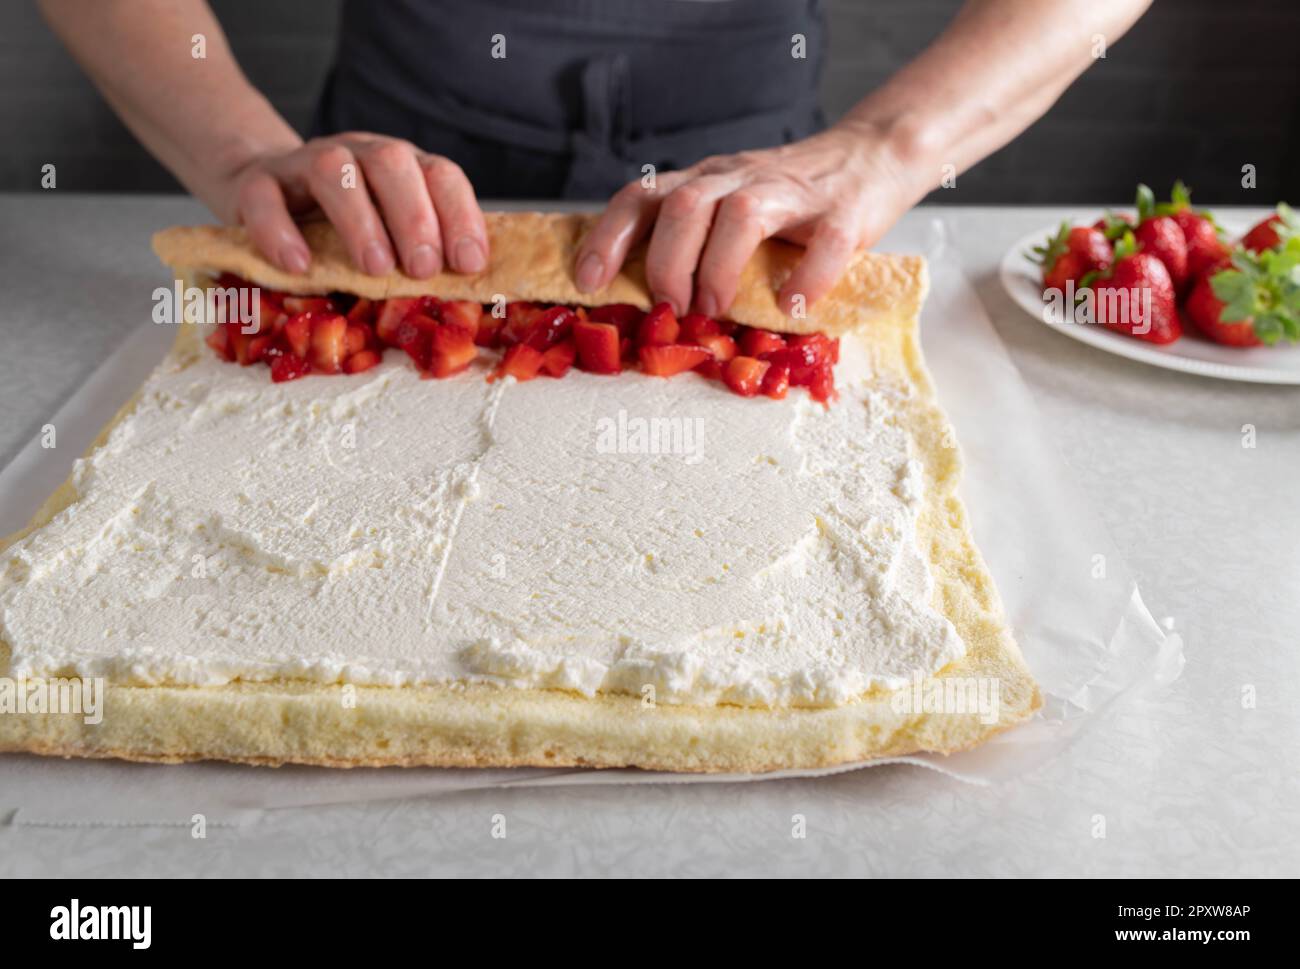 Making swiss roll. Get´s rolled up with whipped cream and strawberry filling by woman´s hands on kitchen counter. Stock Photo